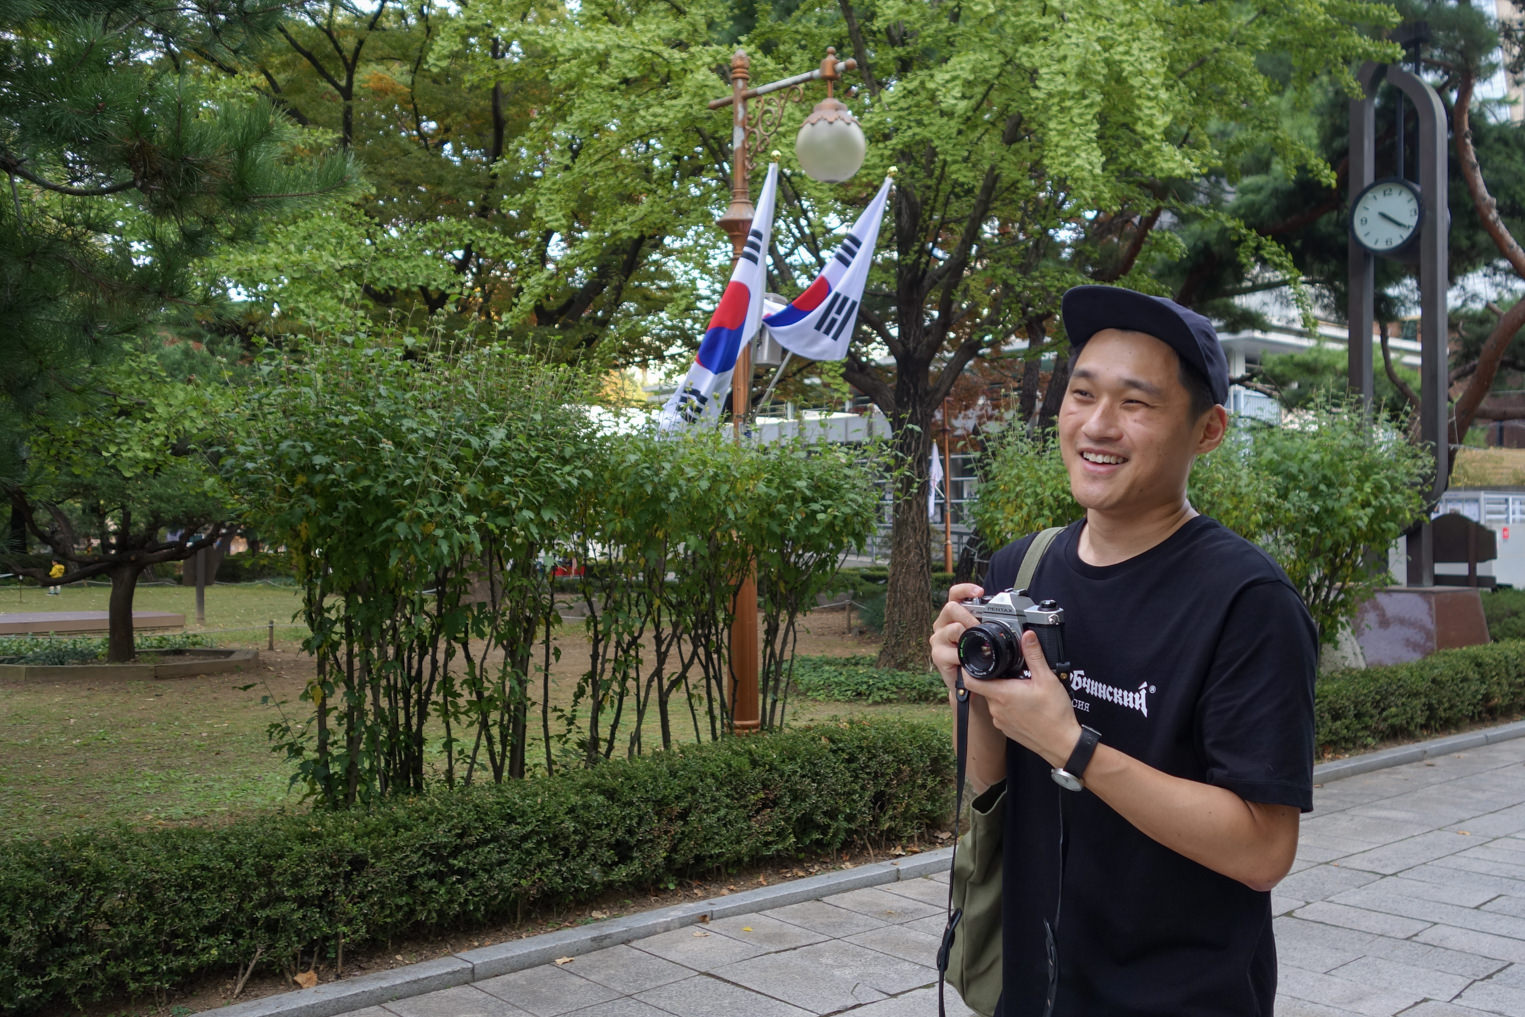 A photo of me, smiling, holding my camera on a trip to Seoul in 2018